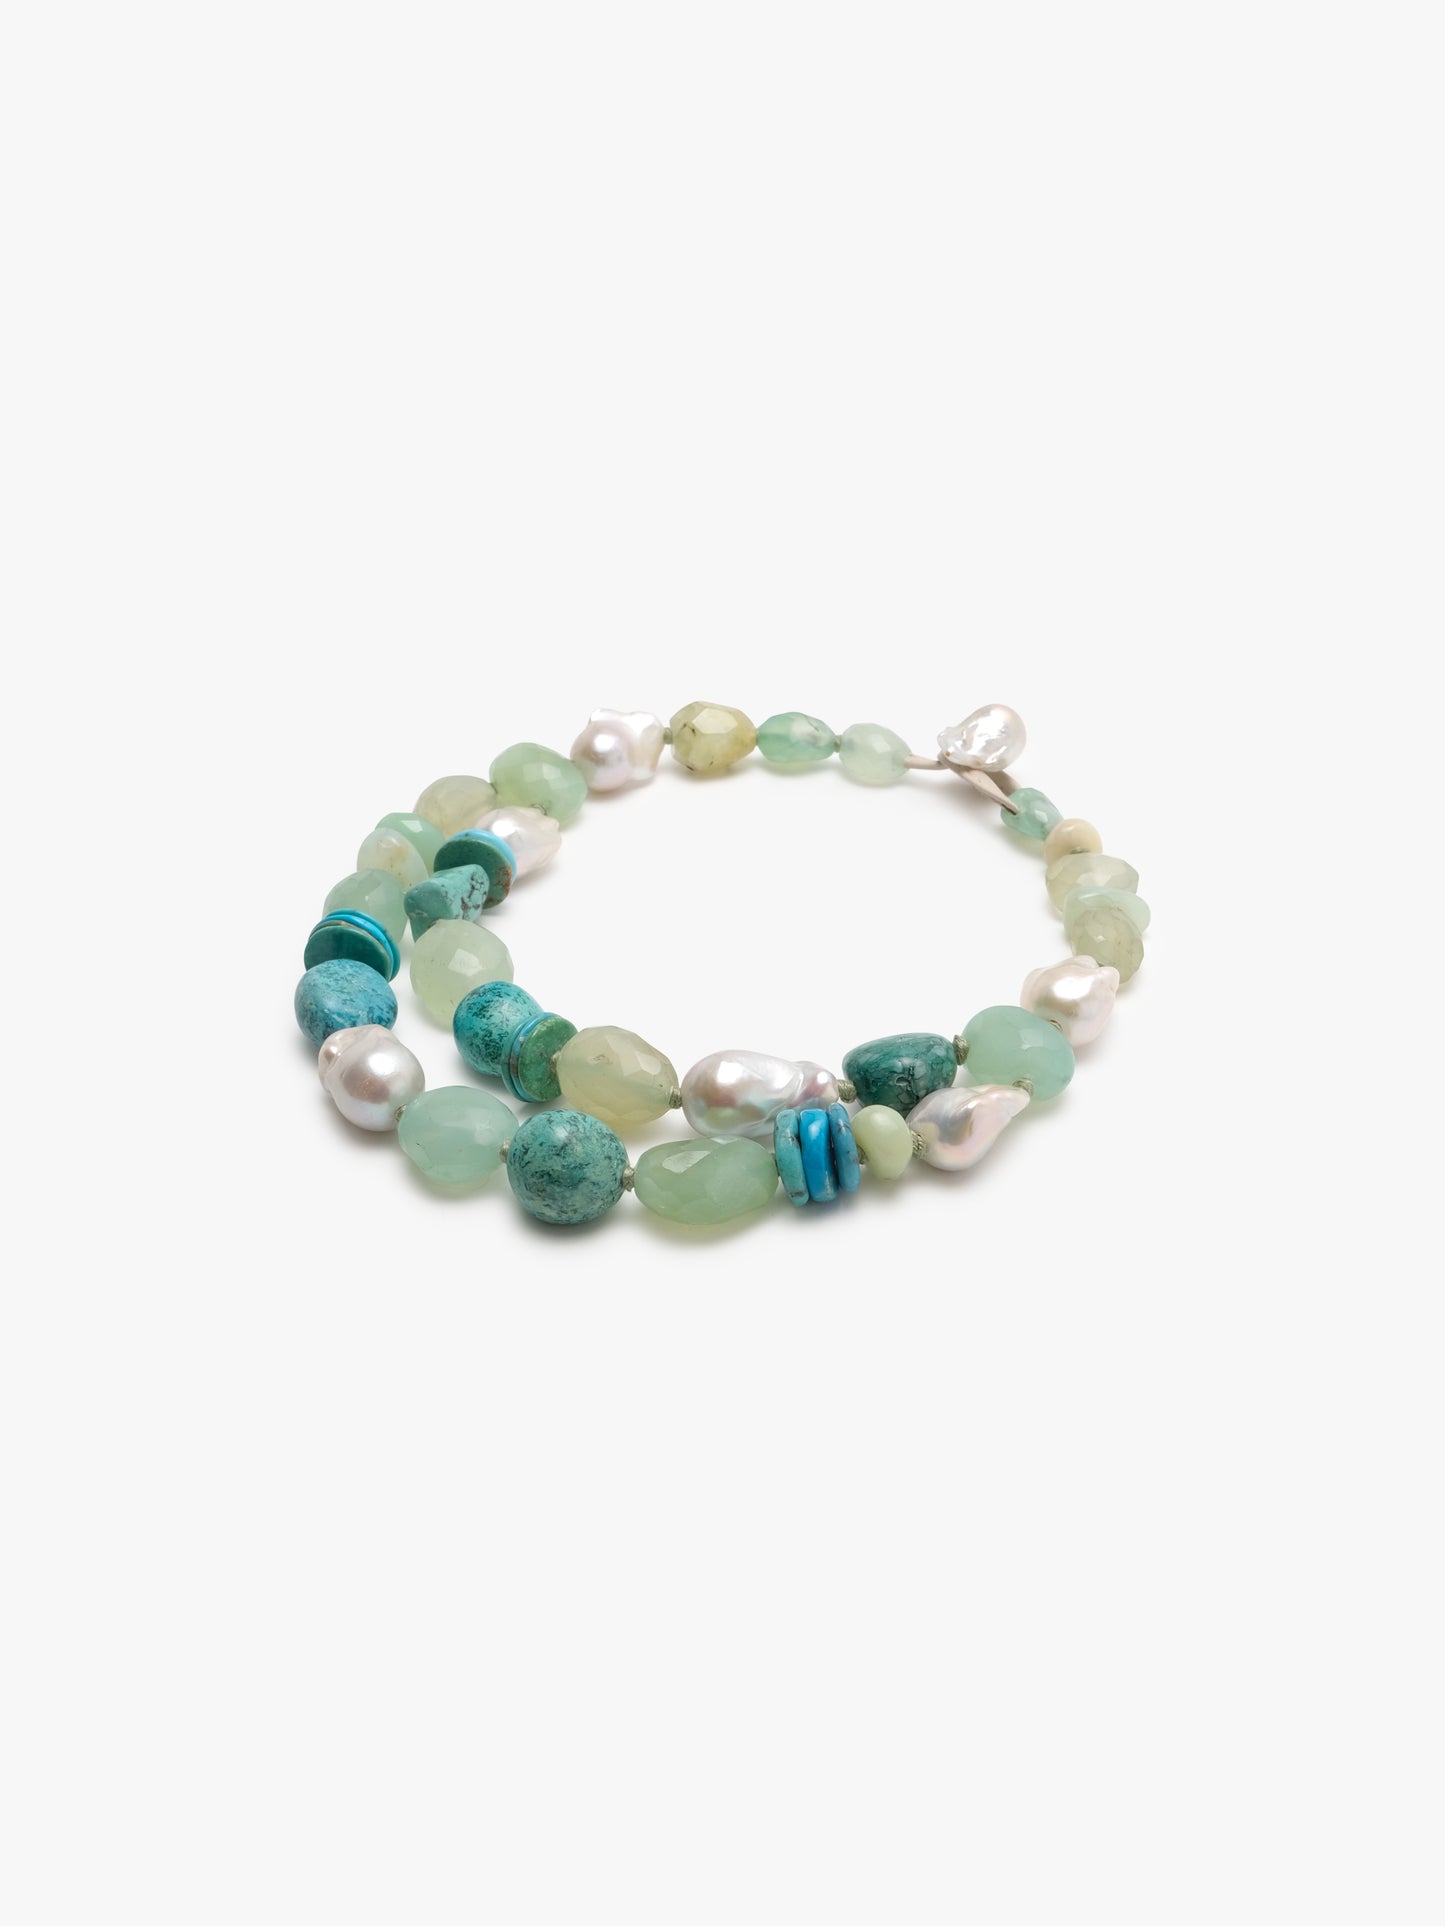 Necklace: prehnite, pearls, turquoise